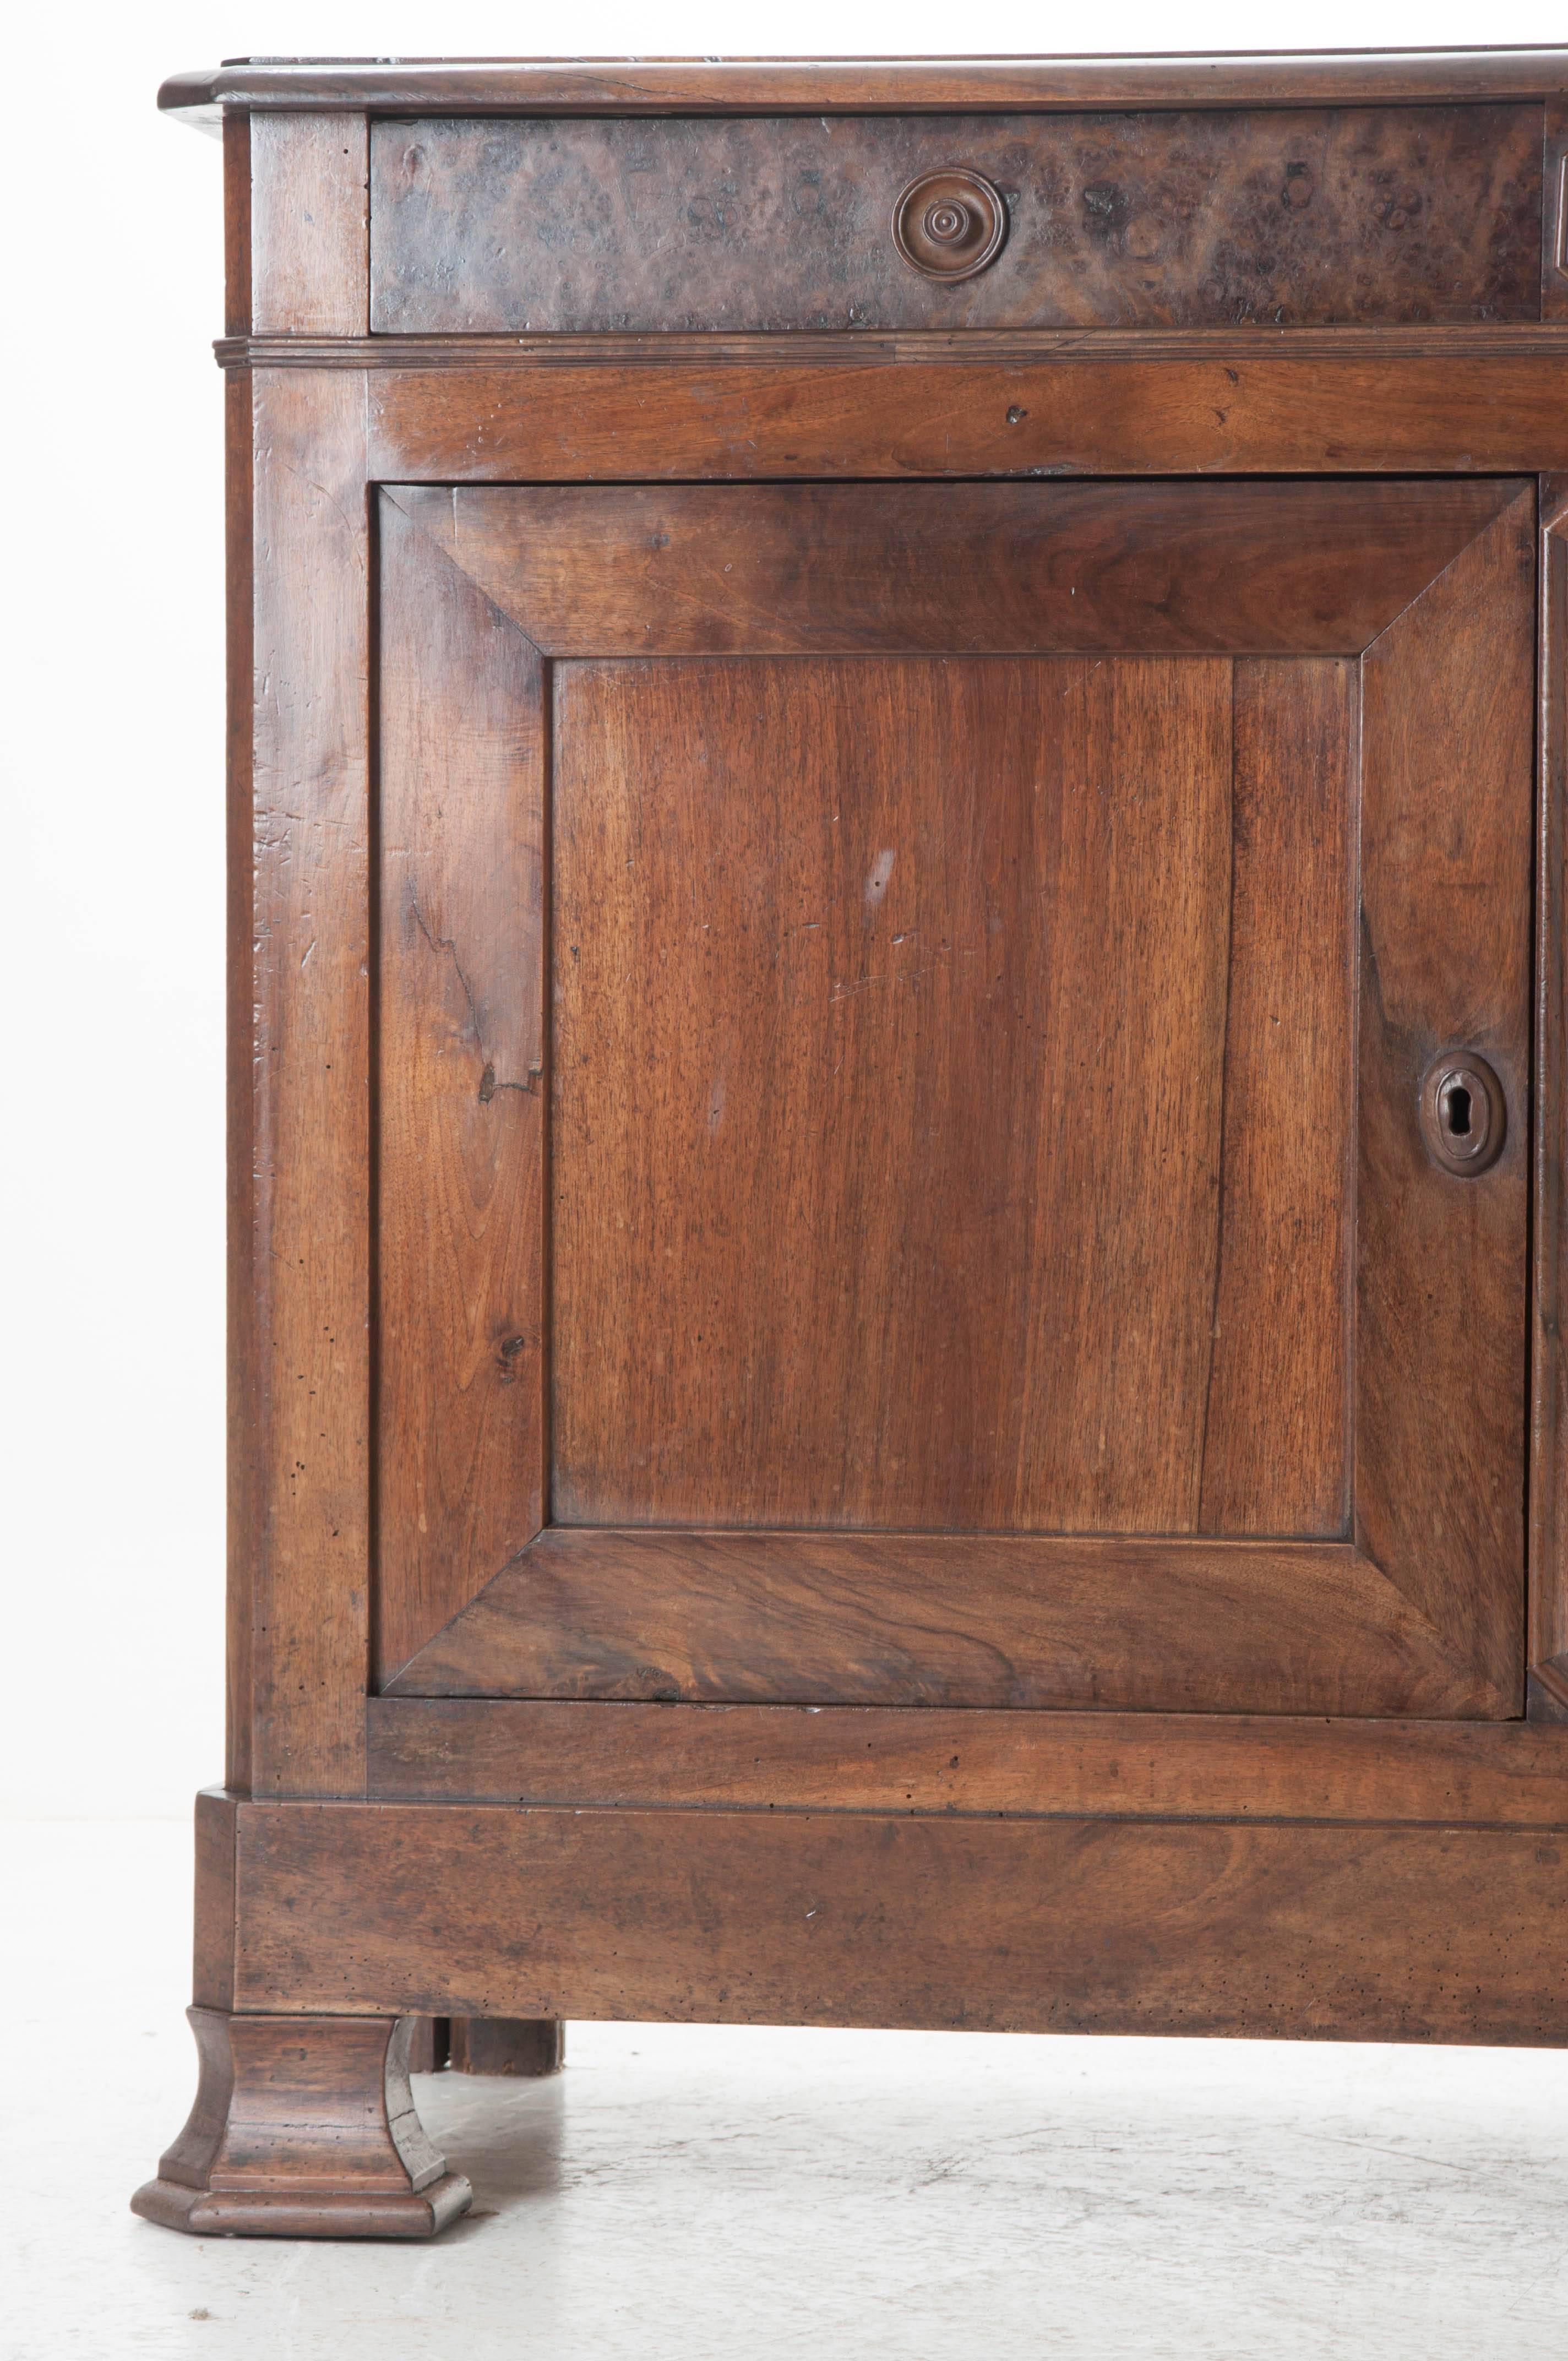 A large 19th century Louis Philippe style walnut buffet with marvelous burl found between the doors as well as on the drawer fronts. Recessed, turned wood knobs grace the two drawers that are set above the two lockable doors. These doors are hung on